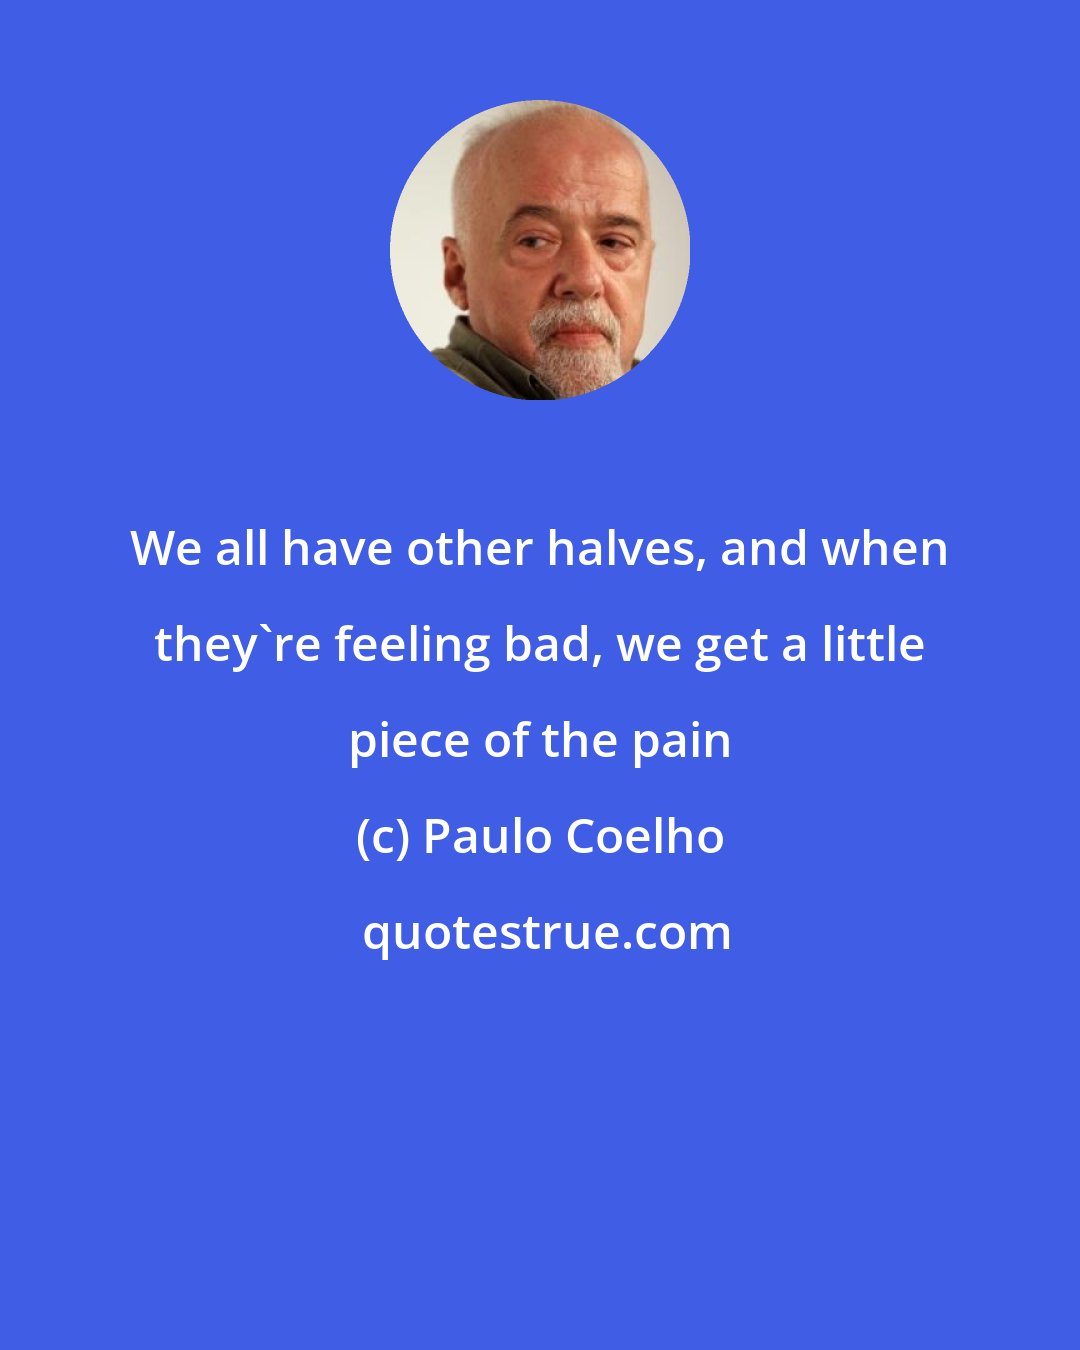 Paulo Coelho: We all have other halves, and when they're feeling bad, we get a little piece of the pain